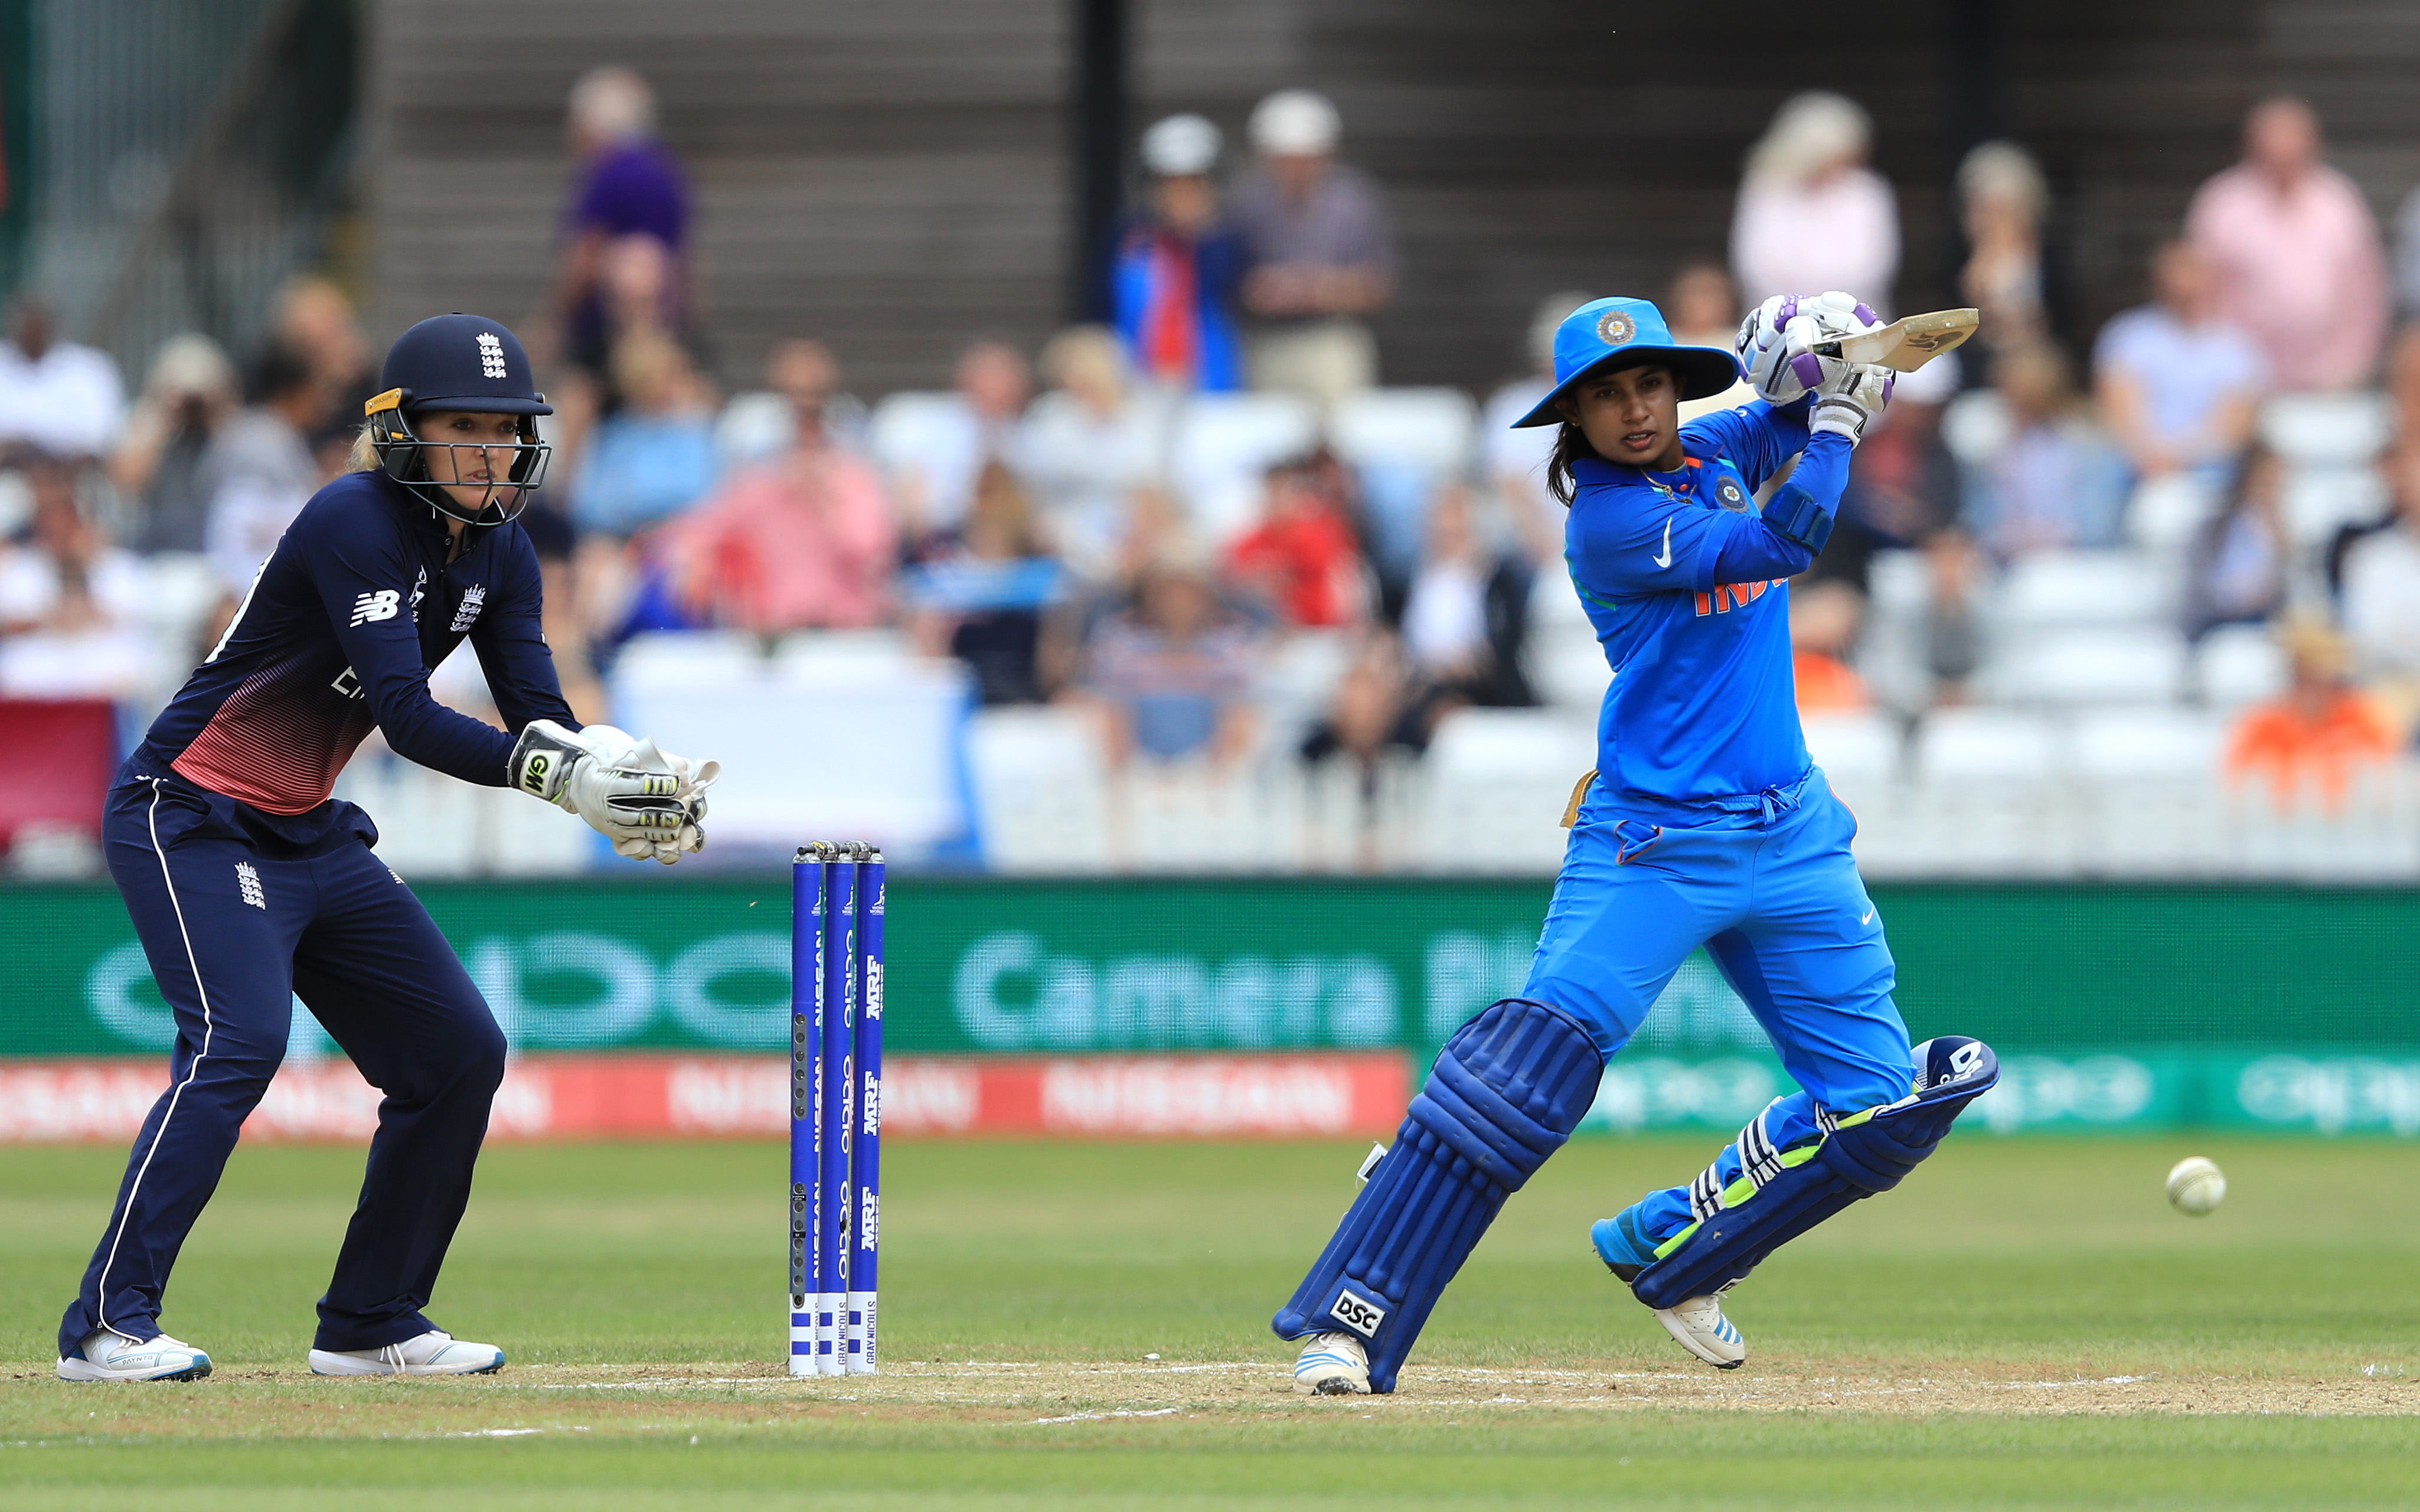 Will work in tandem with Ramesh Powar to build a very strong team for future, promises Mithali Raj